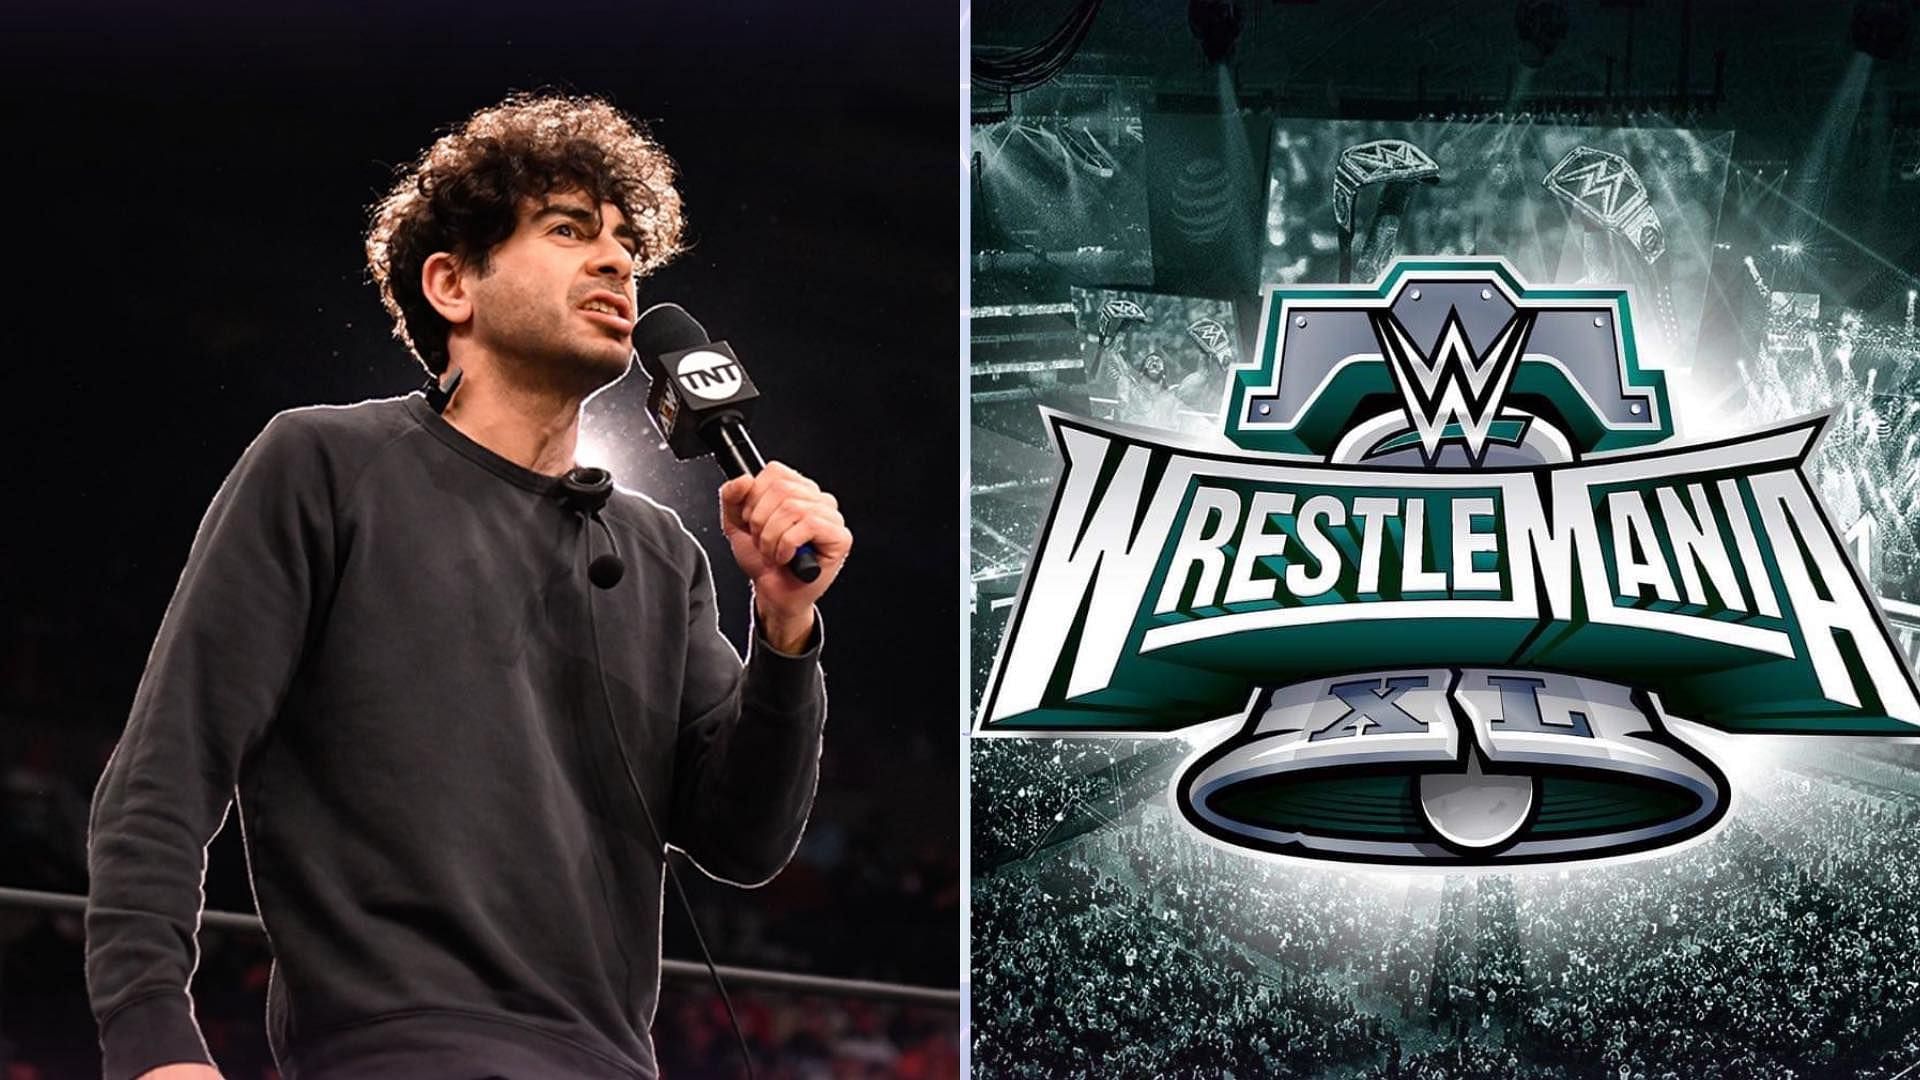 Tony Khan is the owner and president of AEW